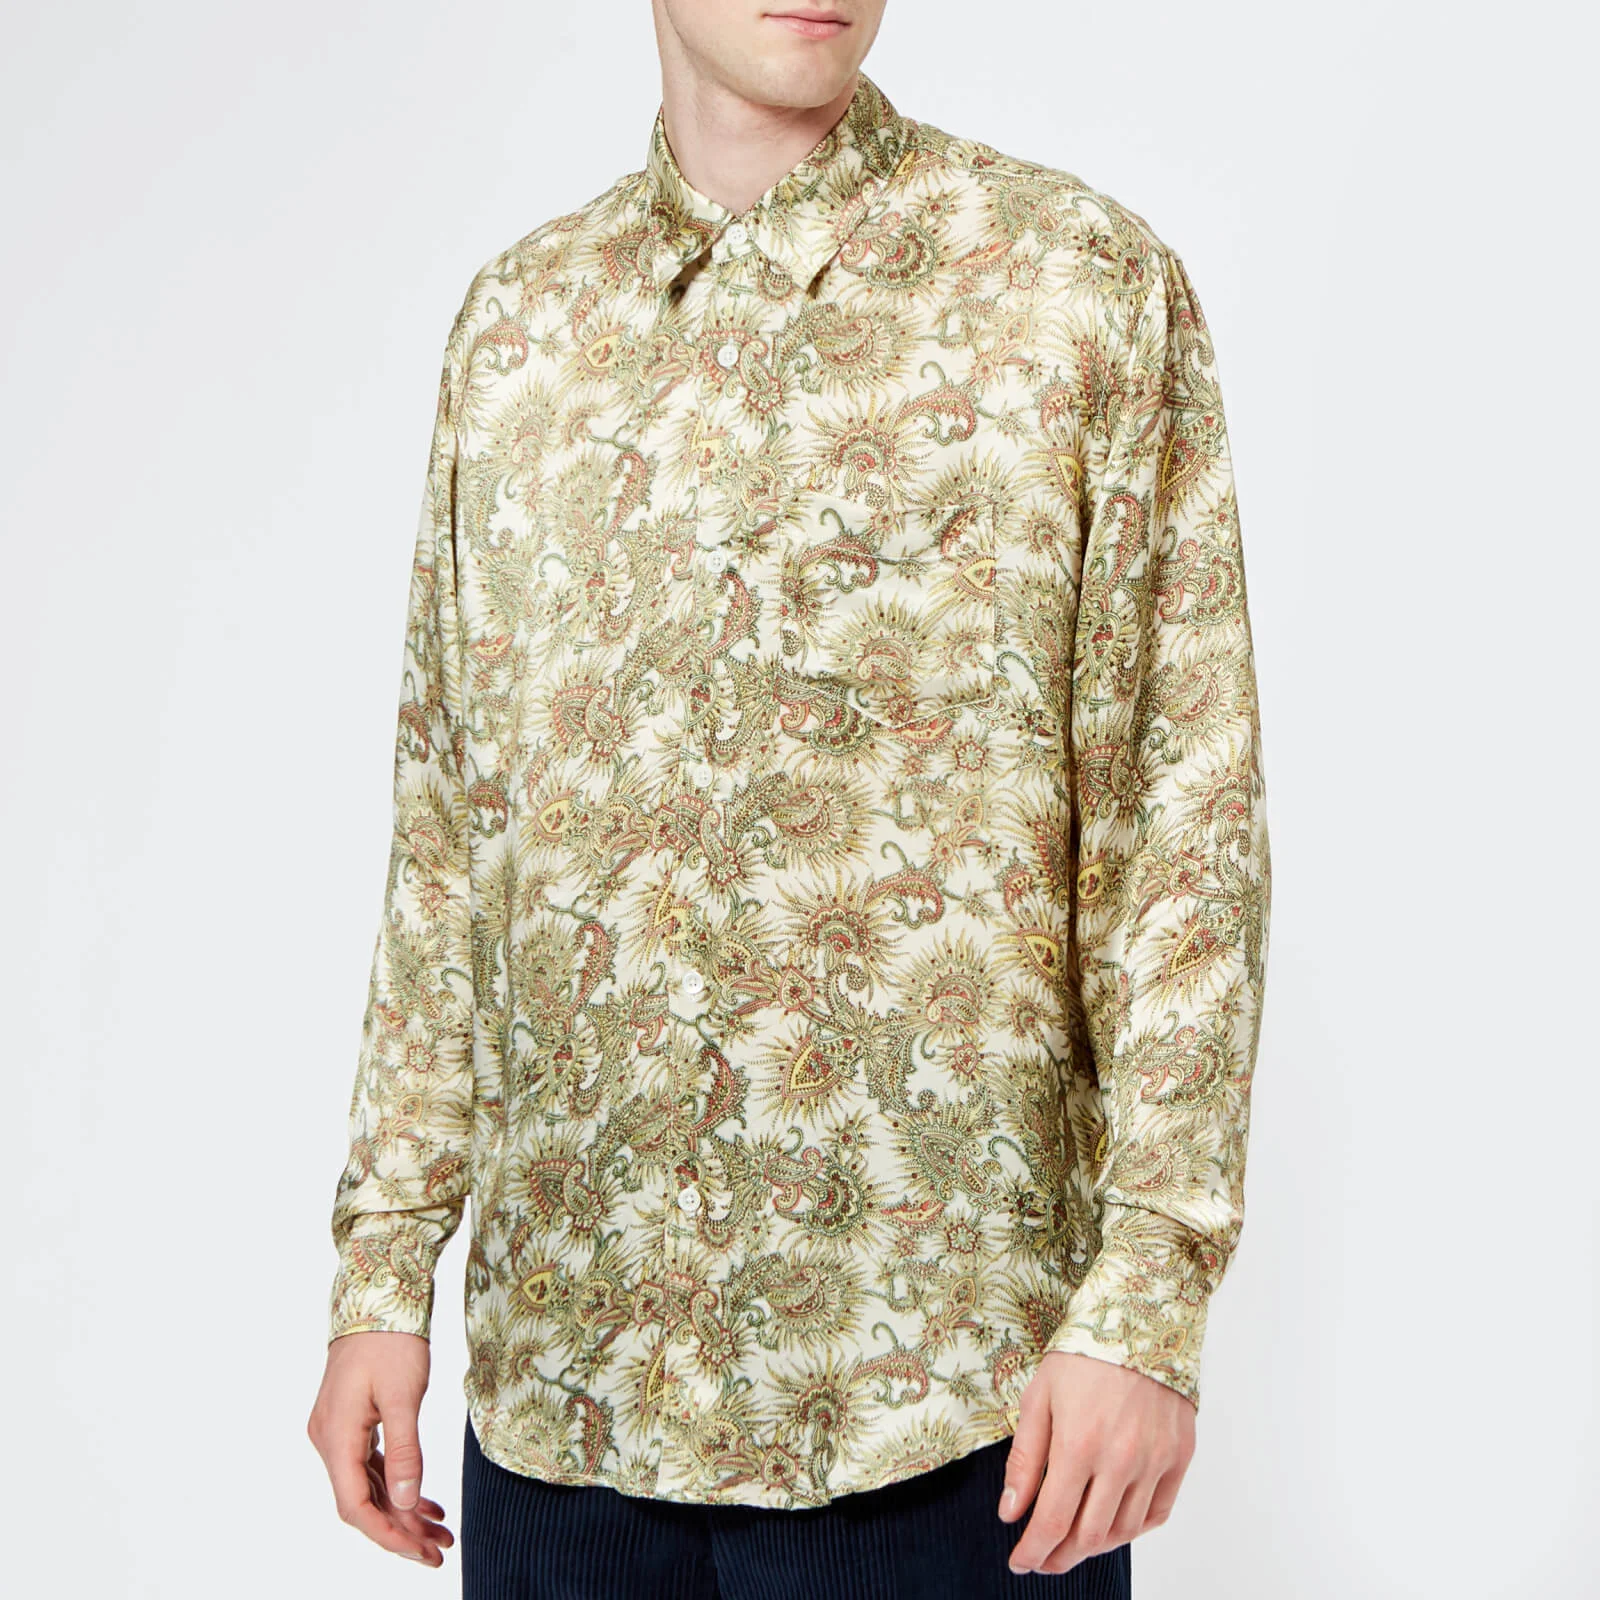 Our Legacy Men's Initial Patterned Shirt - Plant Print Image 1